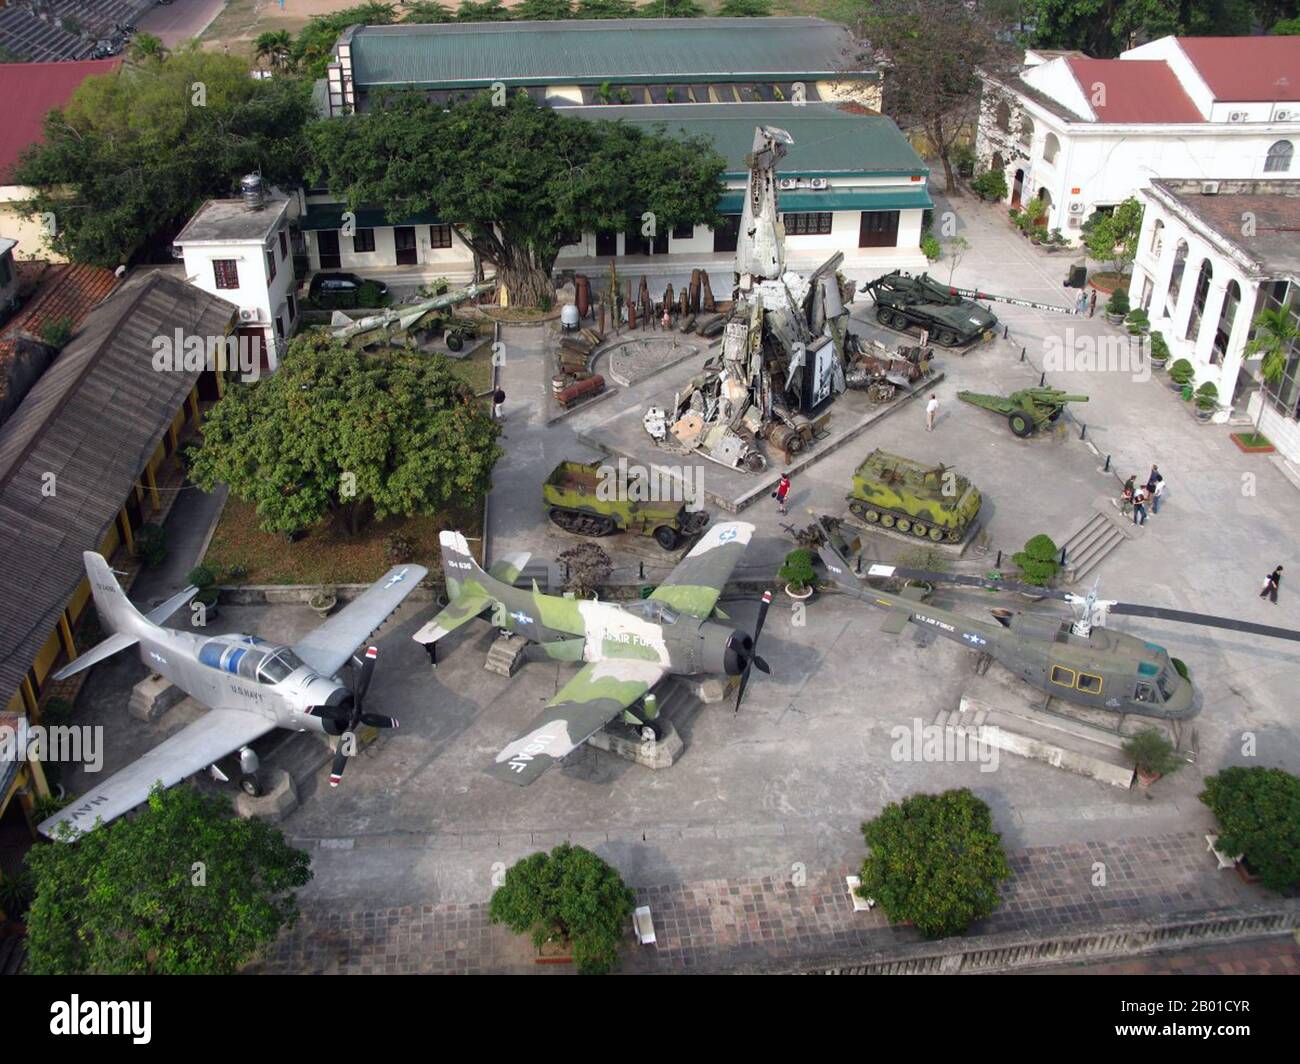 Vietnam: The rear court of the Army Museum, Hanoi, seen from above, centred on a pyramid of wreckage of shot down planes including parts of a USAF B-52, an F-111 and a French transport plane, 2009. Photo by Sergyei Belyi (public domain).  The Army Museum is one of six national museums in Vietnam. It was established in 22 December 1959, in the centre of Hanoi, and covers 10,000 square metres in area.  The Army Museum offers a comprehensive and patriotic history of the Vietnamese people's armed forces under the leadership of Vietnam's communist party and of president Ho Chi Minh. Stock Photo